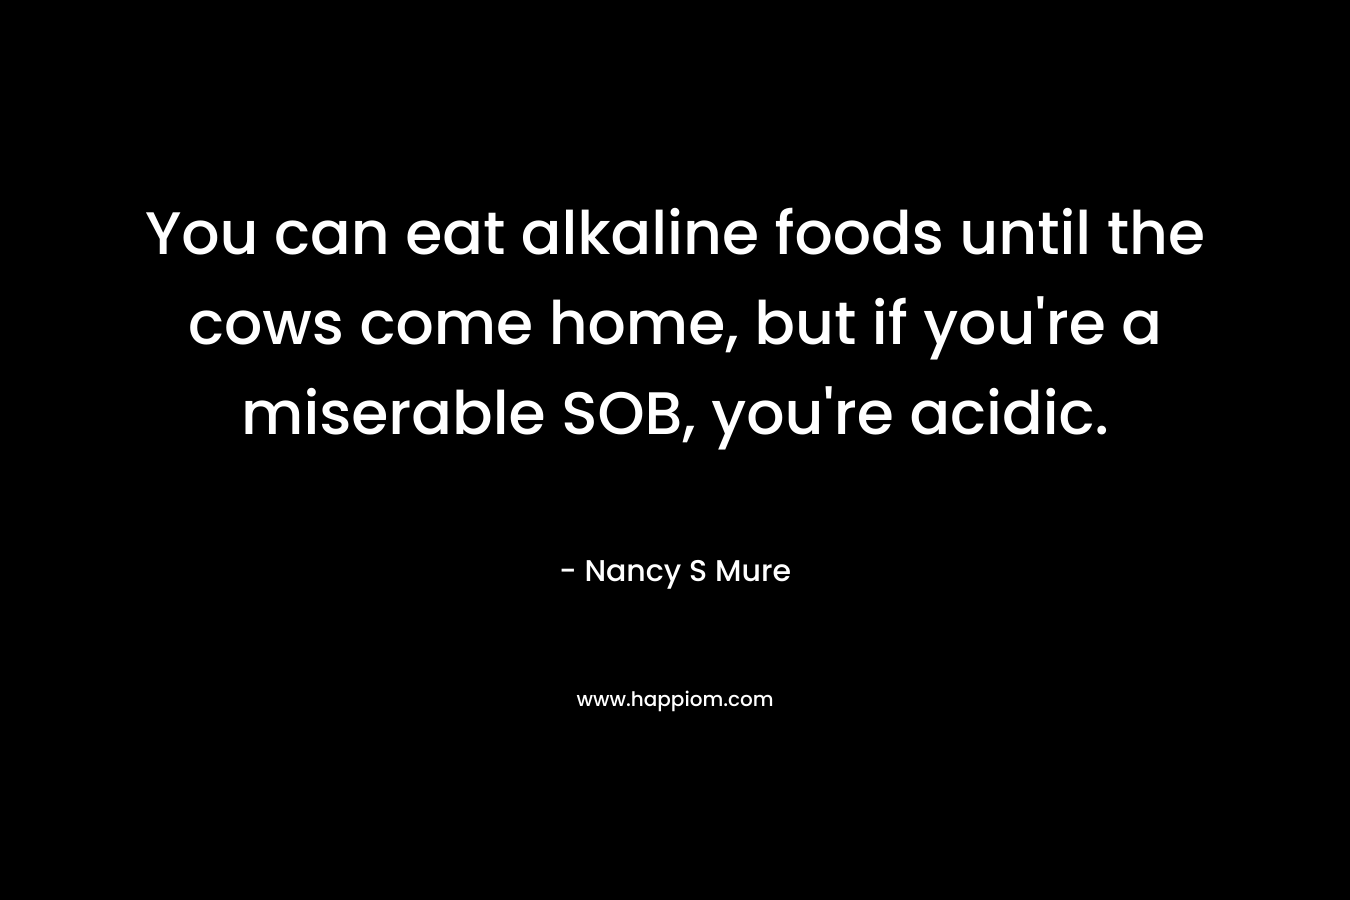 You can eat alkaline foods until the cows come home, but if you’re a miserable SOB, you’re acidic. – Nancy S Mure